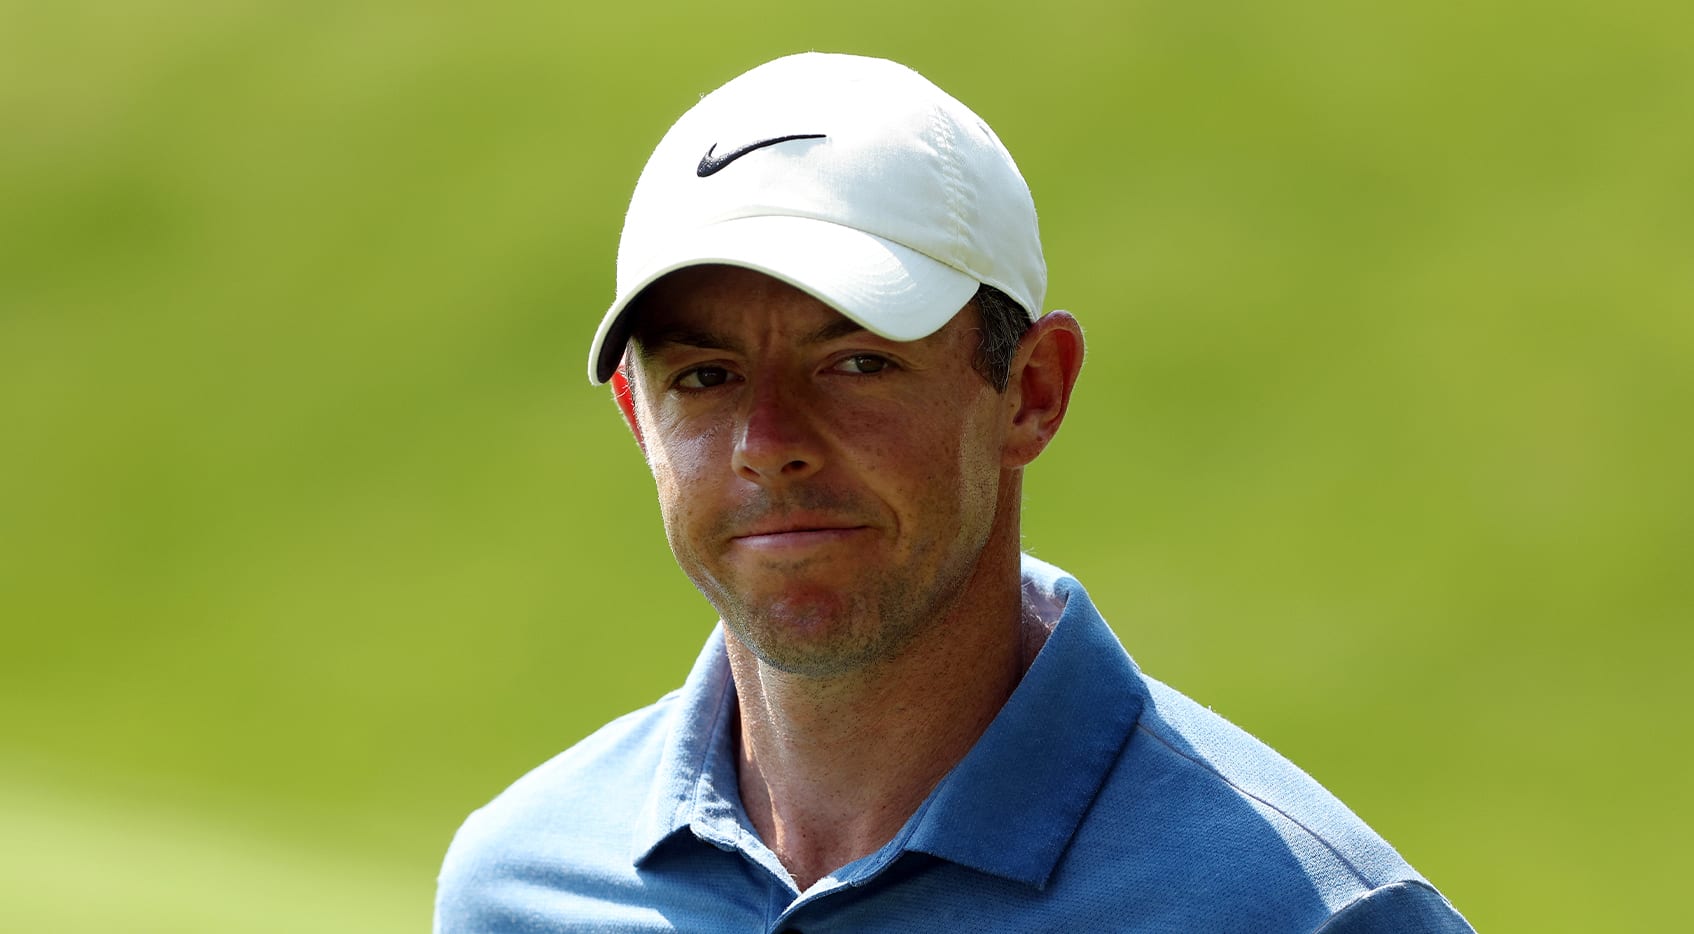 Rory McIlroy withdraws from the RBC Heritage PGA TOUR